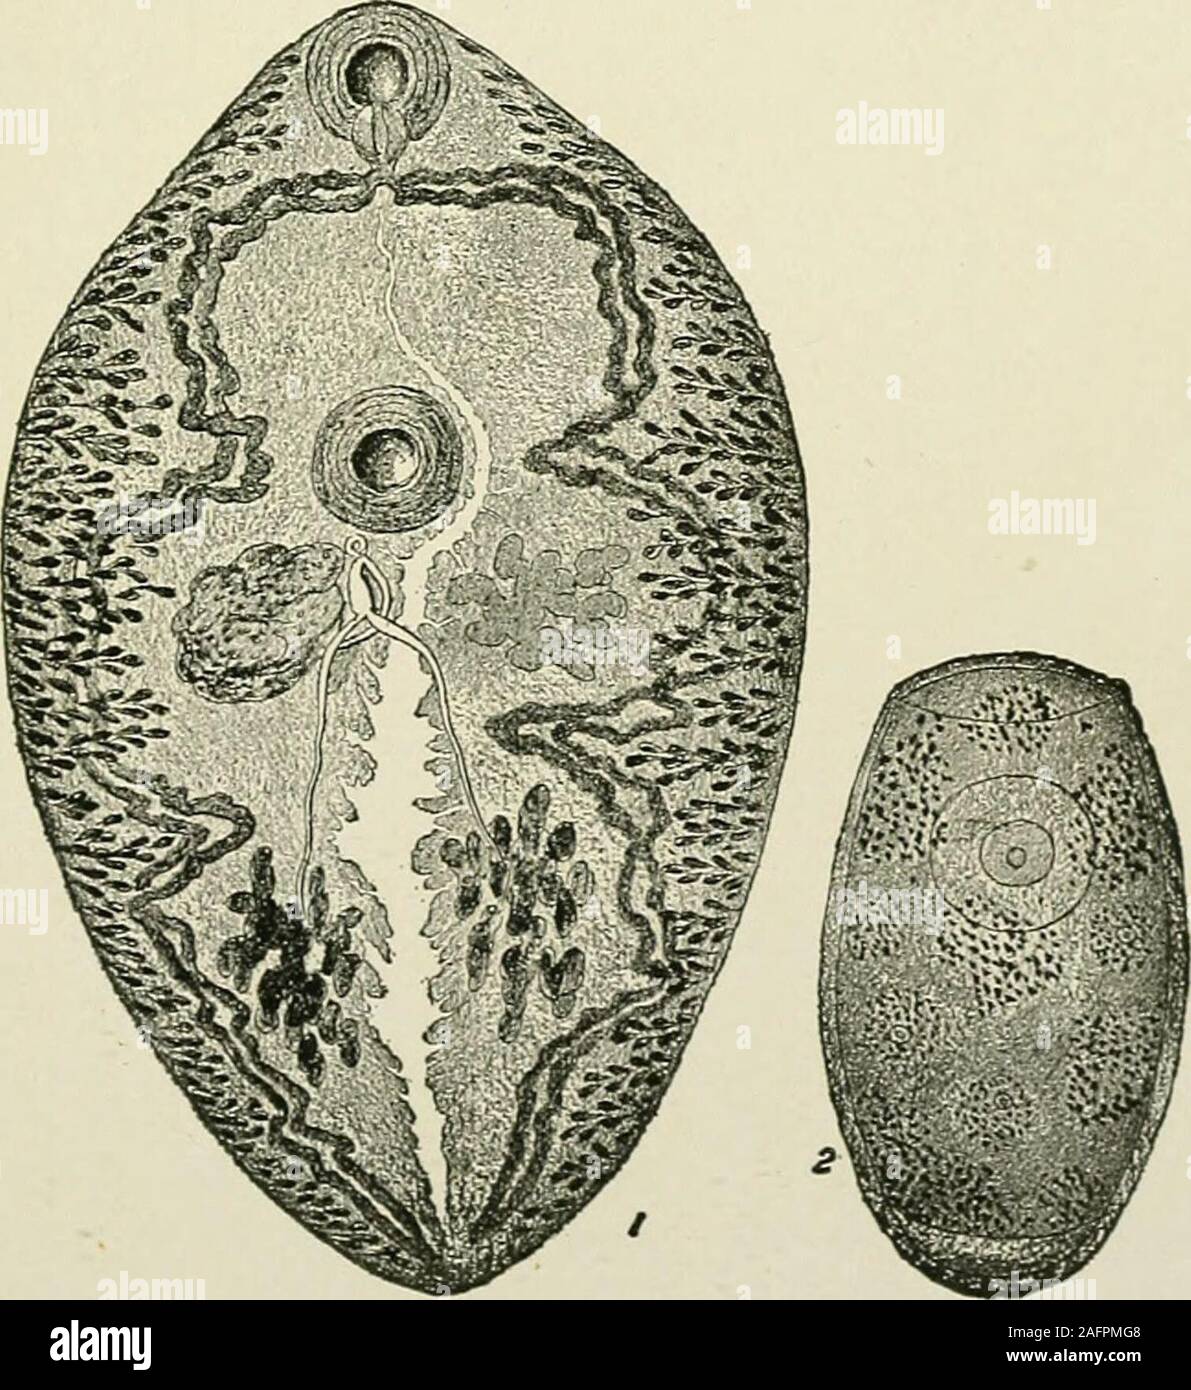 . Internal medicine; a work for the practicing physician on diagnosis and treatment, with a complete Desk index. Fig. 292.—1. Fasciola hepatica.—After Claus. 2. Egg of parasite.—After Braun.. Fig. 293.—1. Paragonimns westermani.—.After Leukart. 2. Egg of parasite.—.fter Katsurada, DISEASES DUE TO CESTODES. 255 their long ilianiotor transverse to the long axis of the worm, those in theniiddle are scjuarish, and the most distant have their long diameter in thelong axis of the worm. The lateral hortlers usually converge toward theanterior extremity in such a manner that the anterior border of th Stock Photo